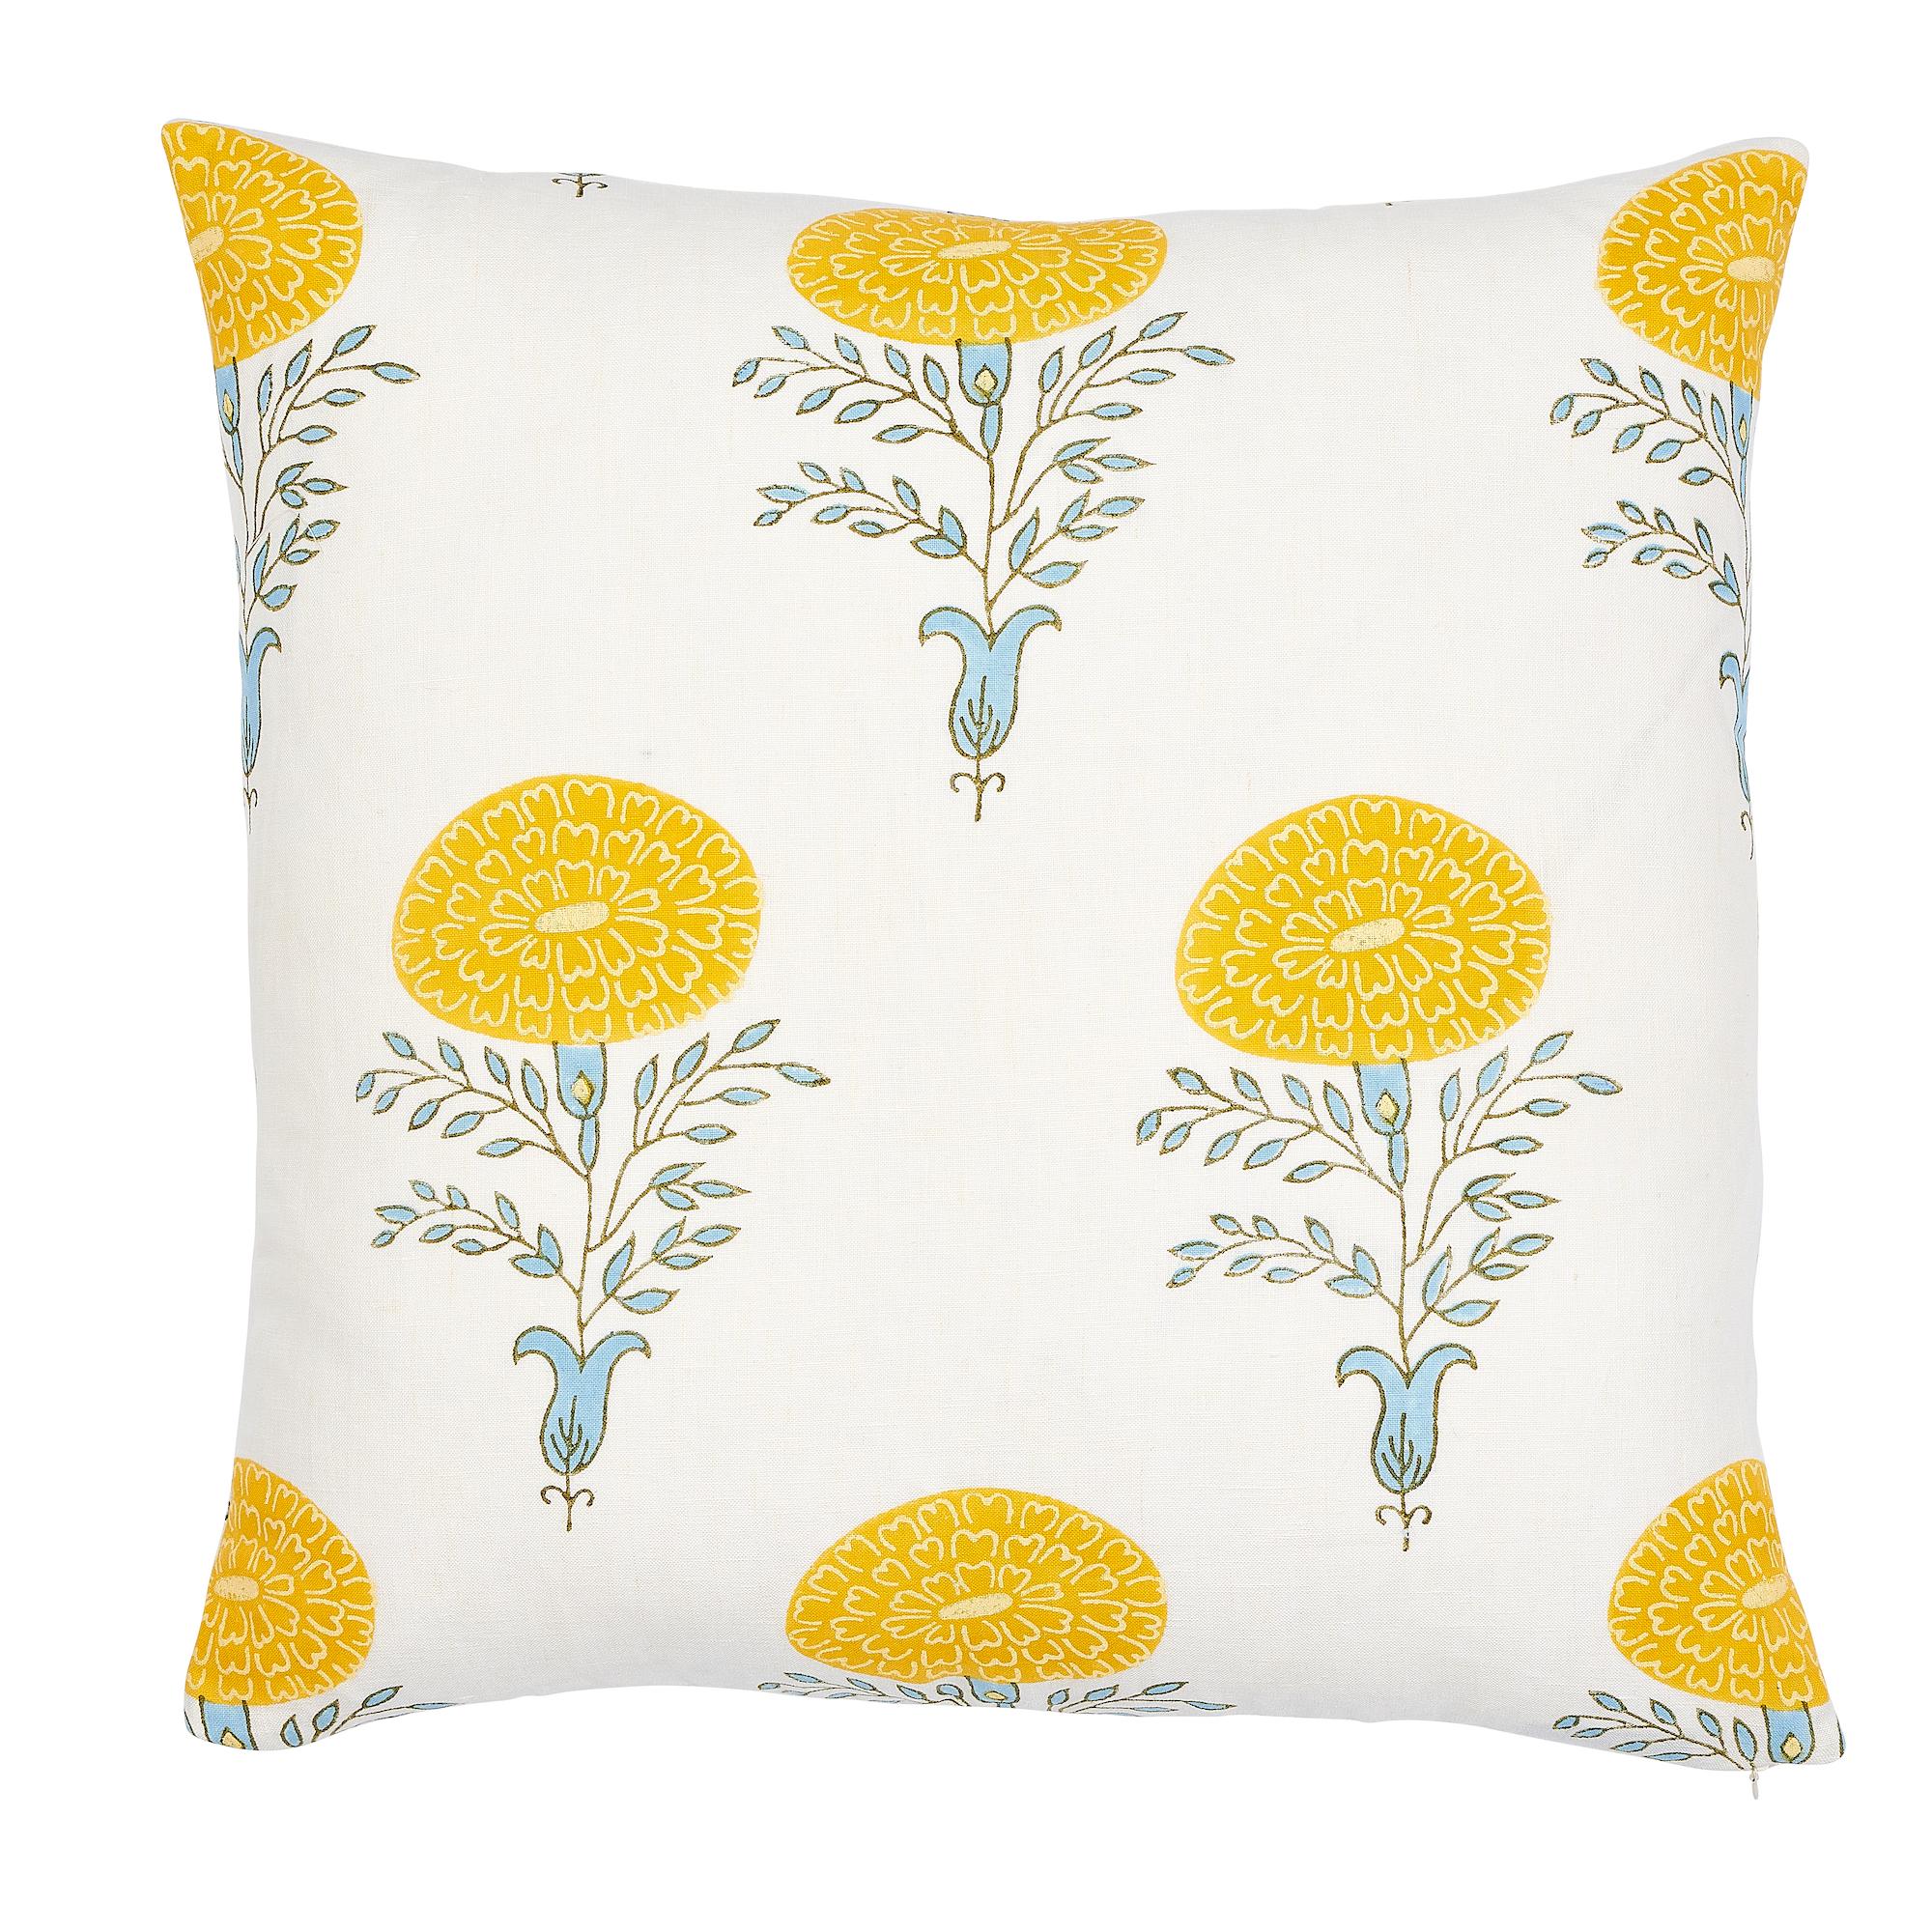 This pillow features Marigold by Molly Mahon for Schumacher with a knife edge finish. A happy, graphic ode to the marigold, one of Molly‚Äôs favorite flowers, and a symbol of passion and creativity on the Subcontinent. Hand-block printed in India by